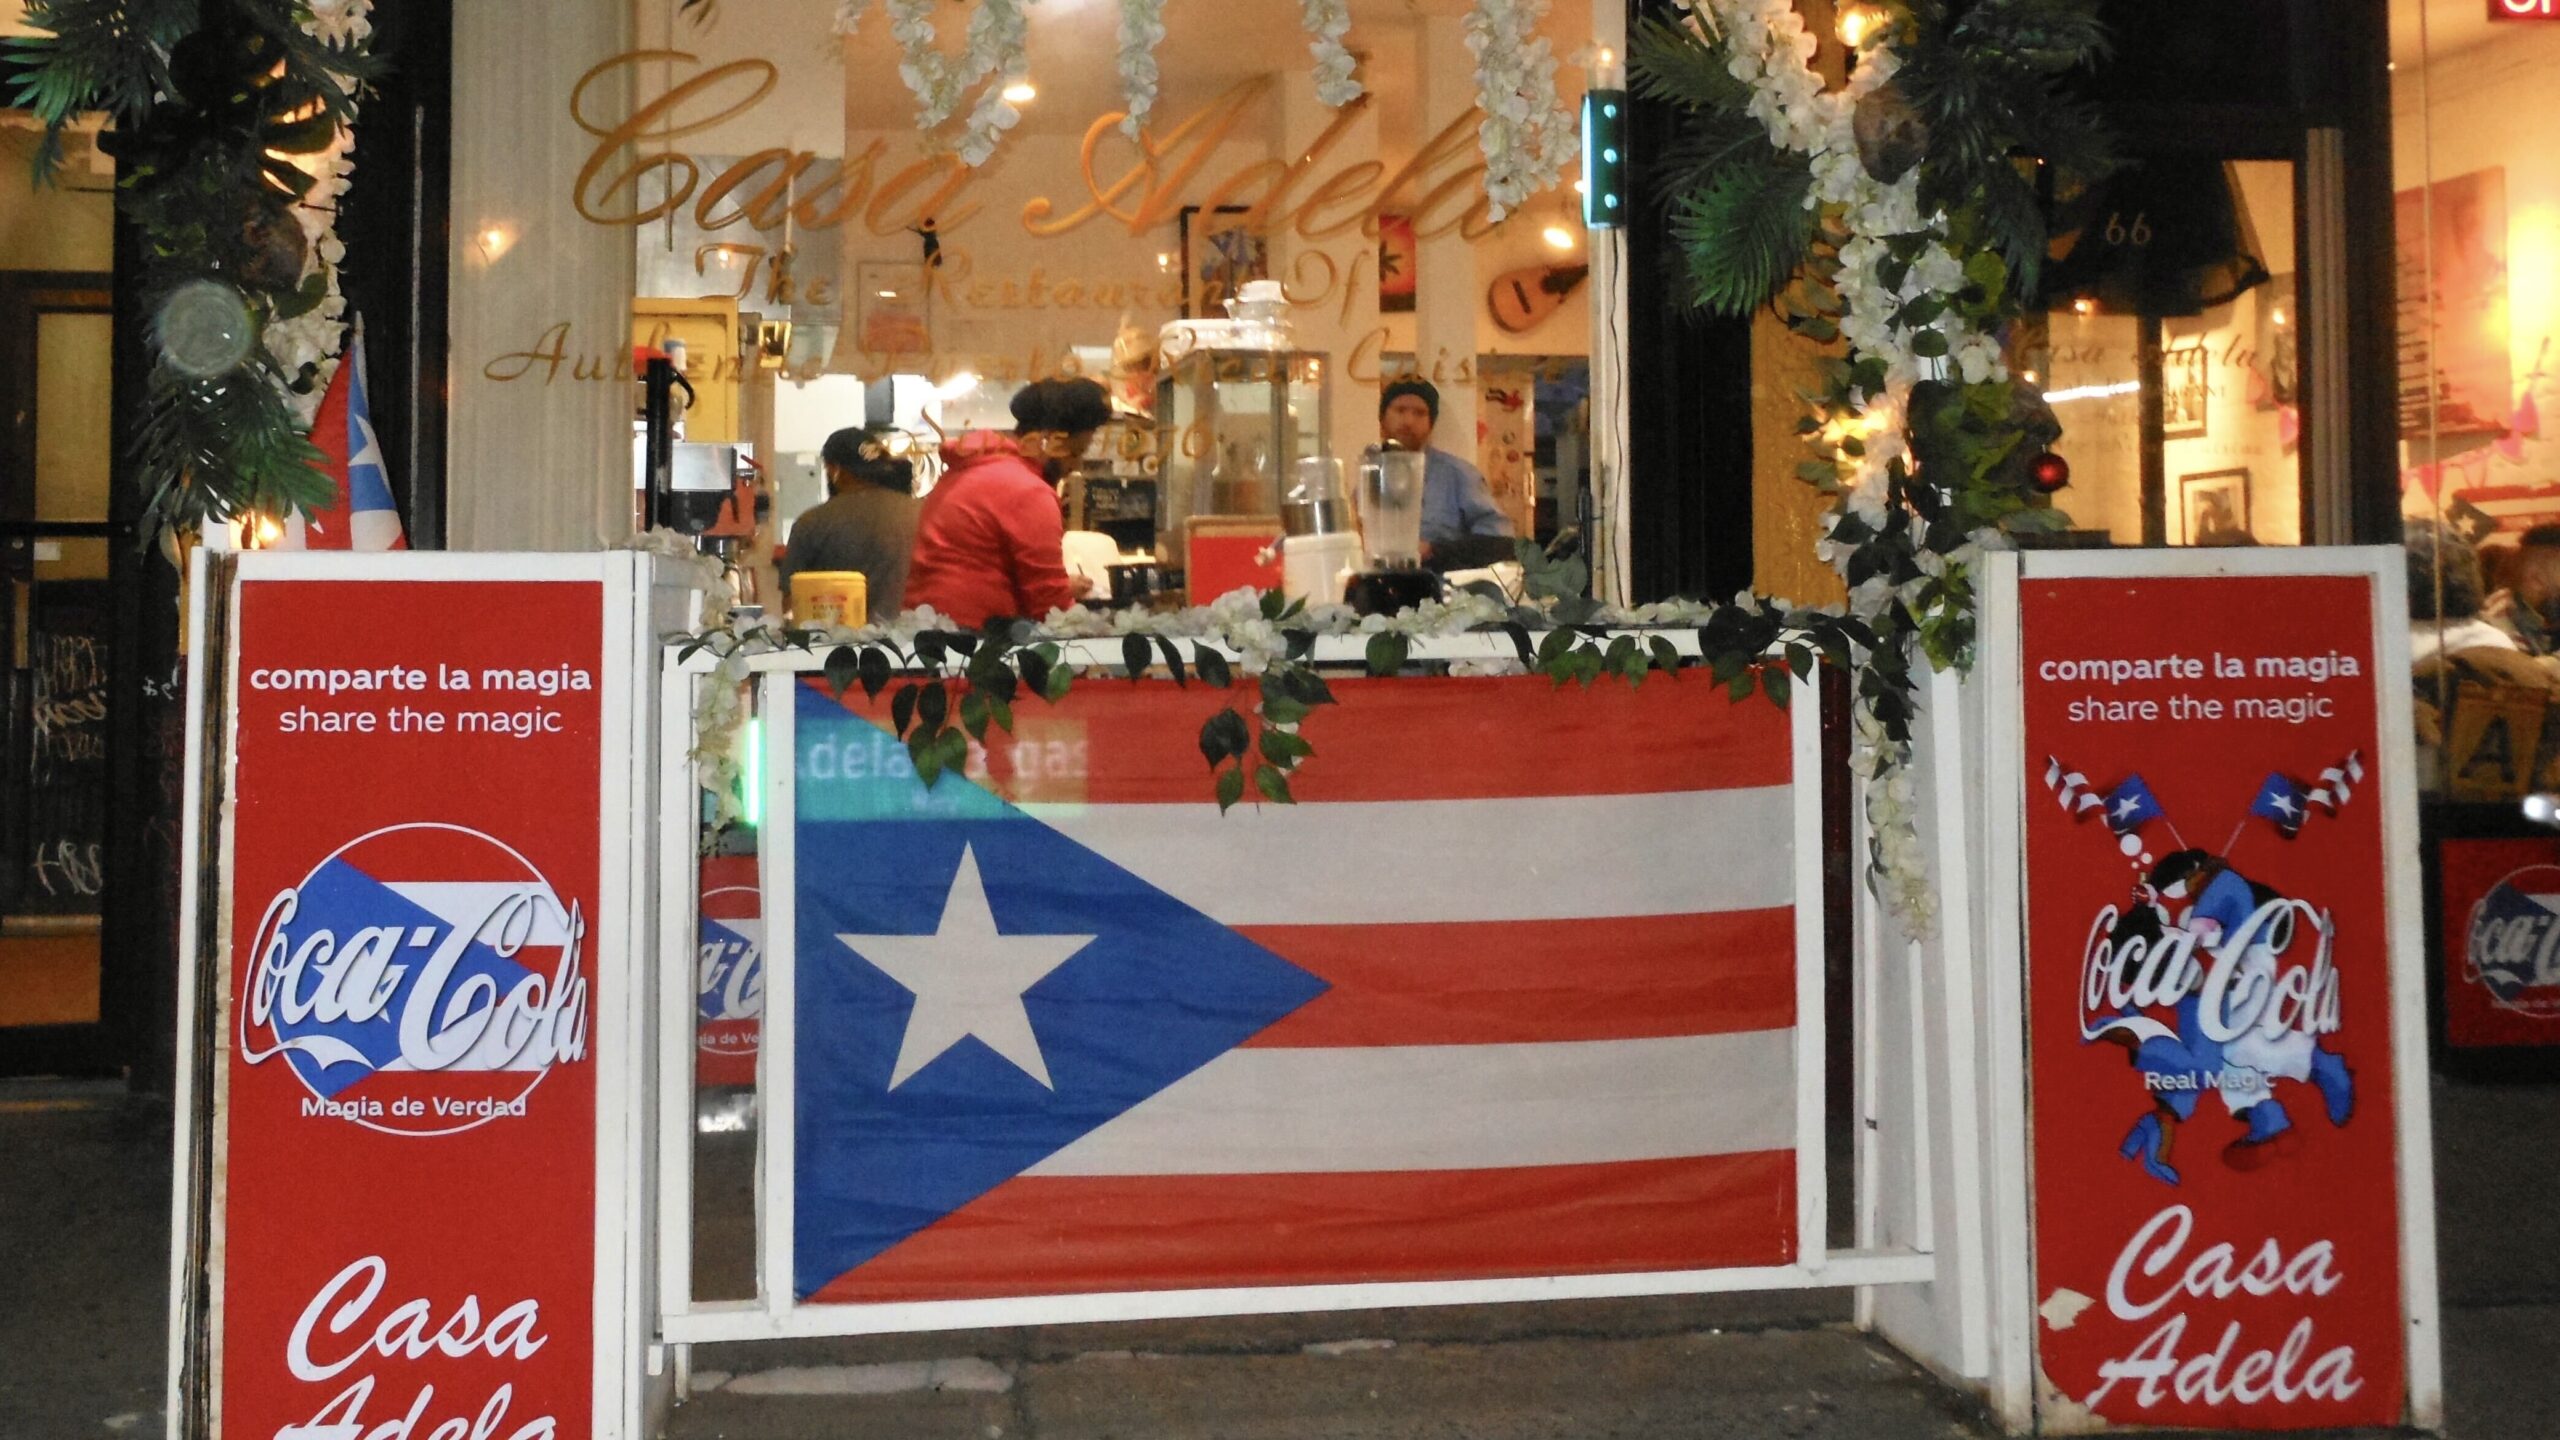 Front of restaurant with Puerto Rican flags and gold text on window reading “Casa Adela”